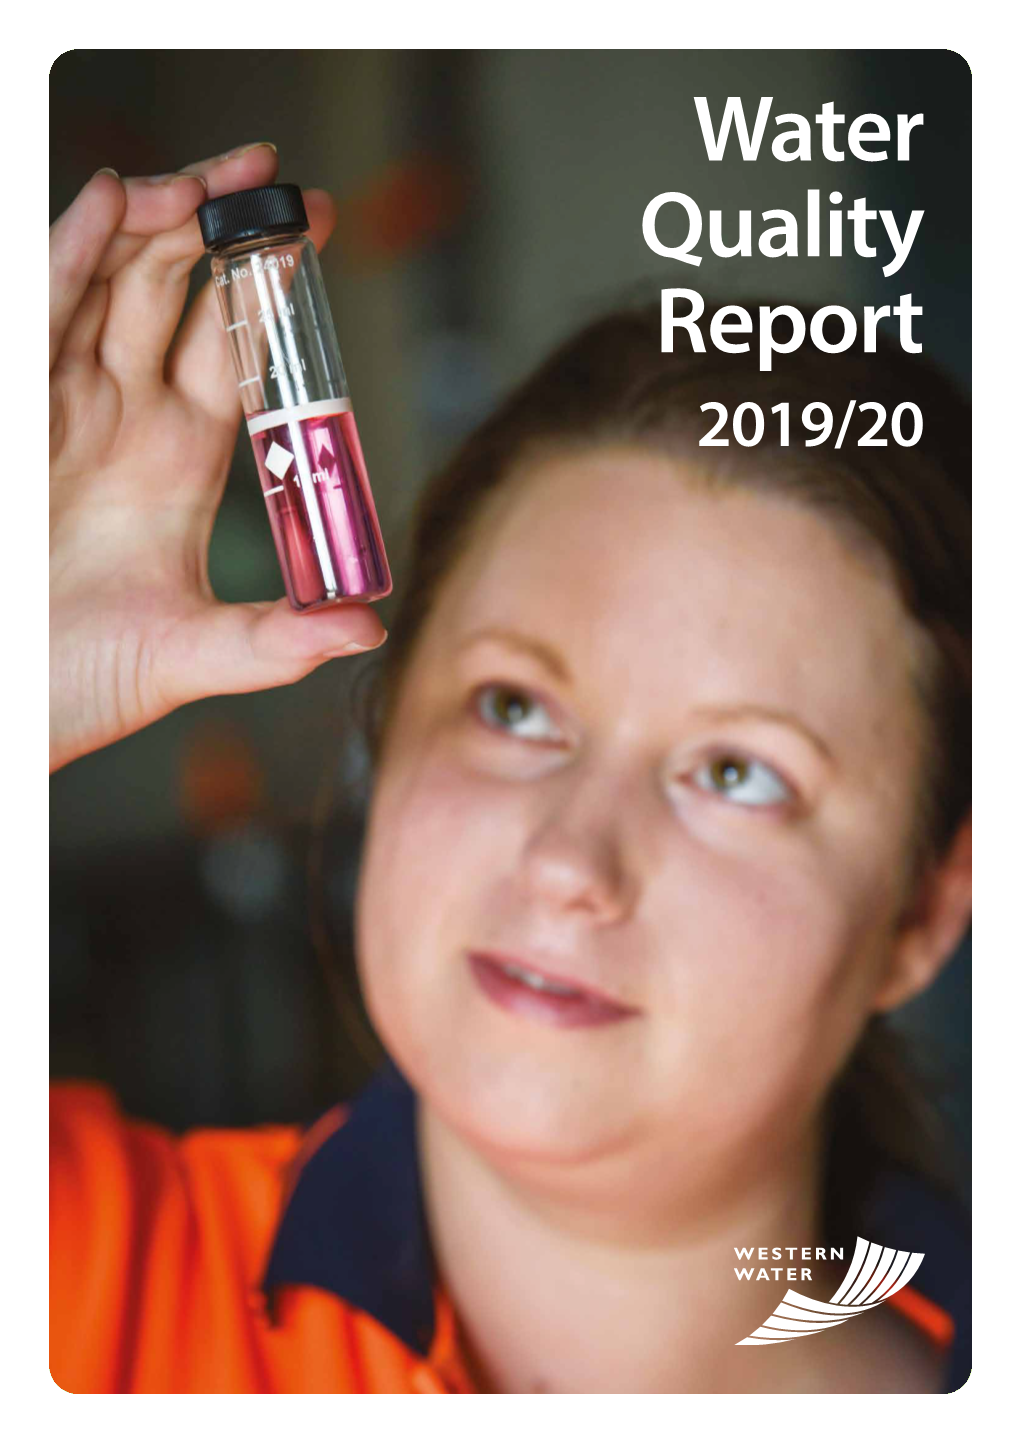 2019/20 Water Quality Report 2019/20